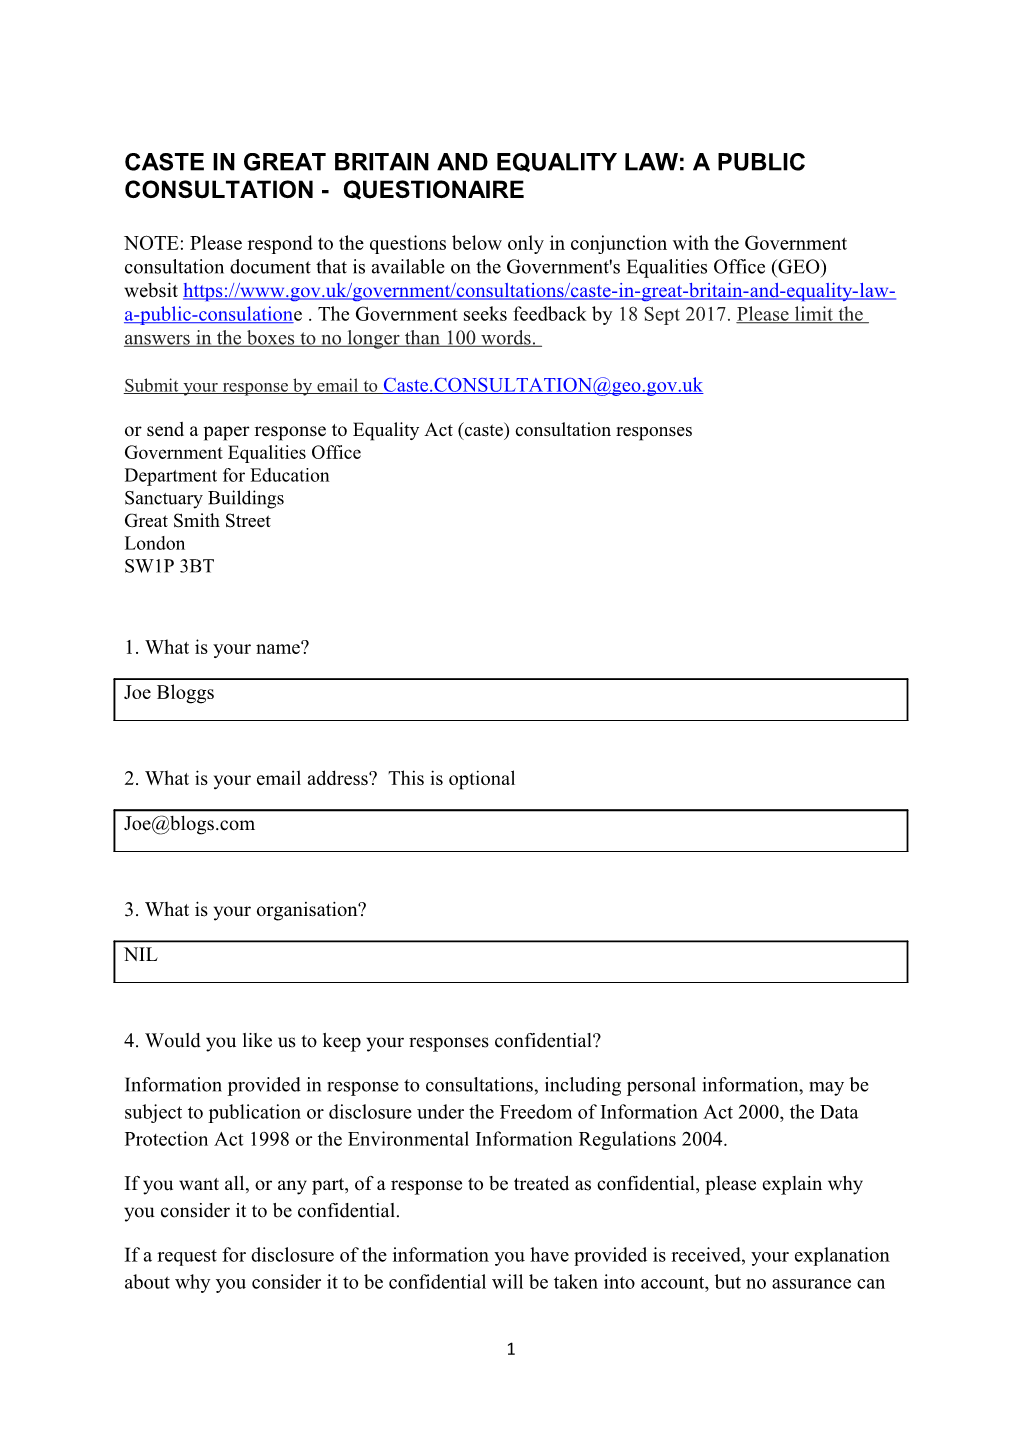 Caste in Great Britain and Equality Law: a Public Consultation - Questionaire